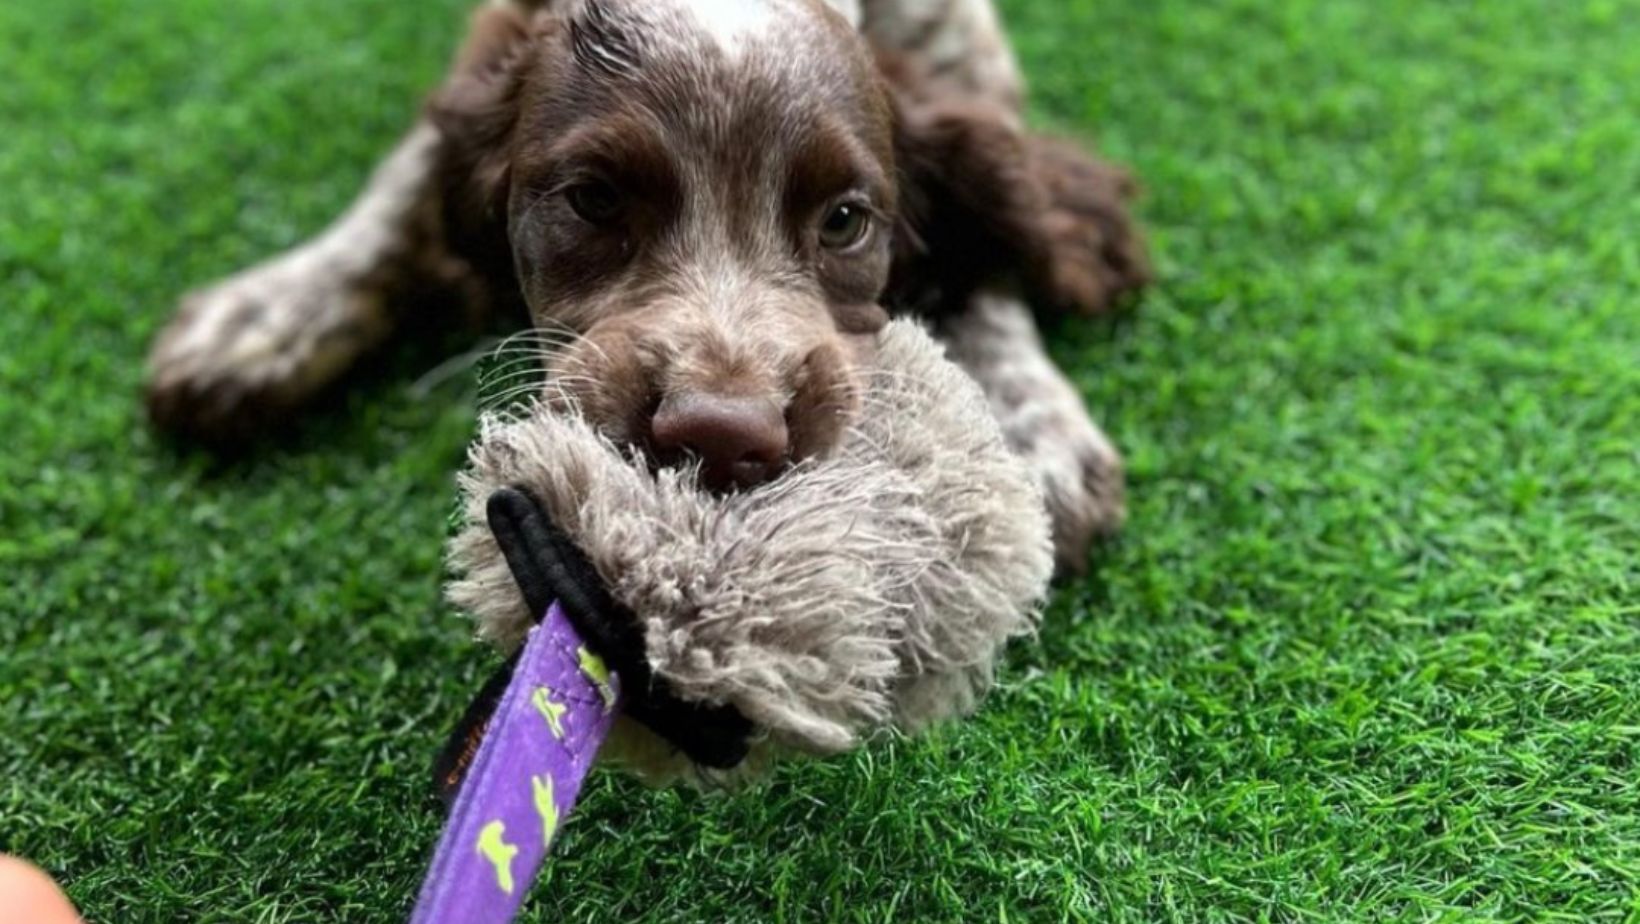 spaniel puppy tugging on squeaky toy